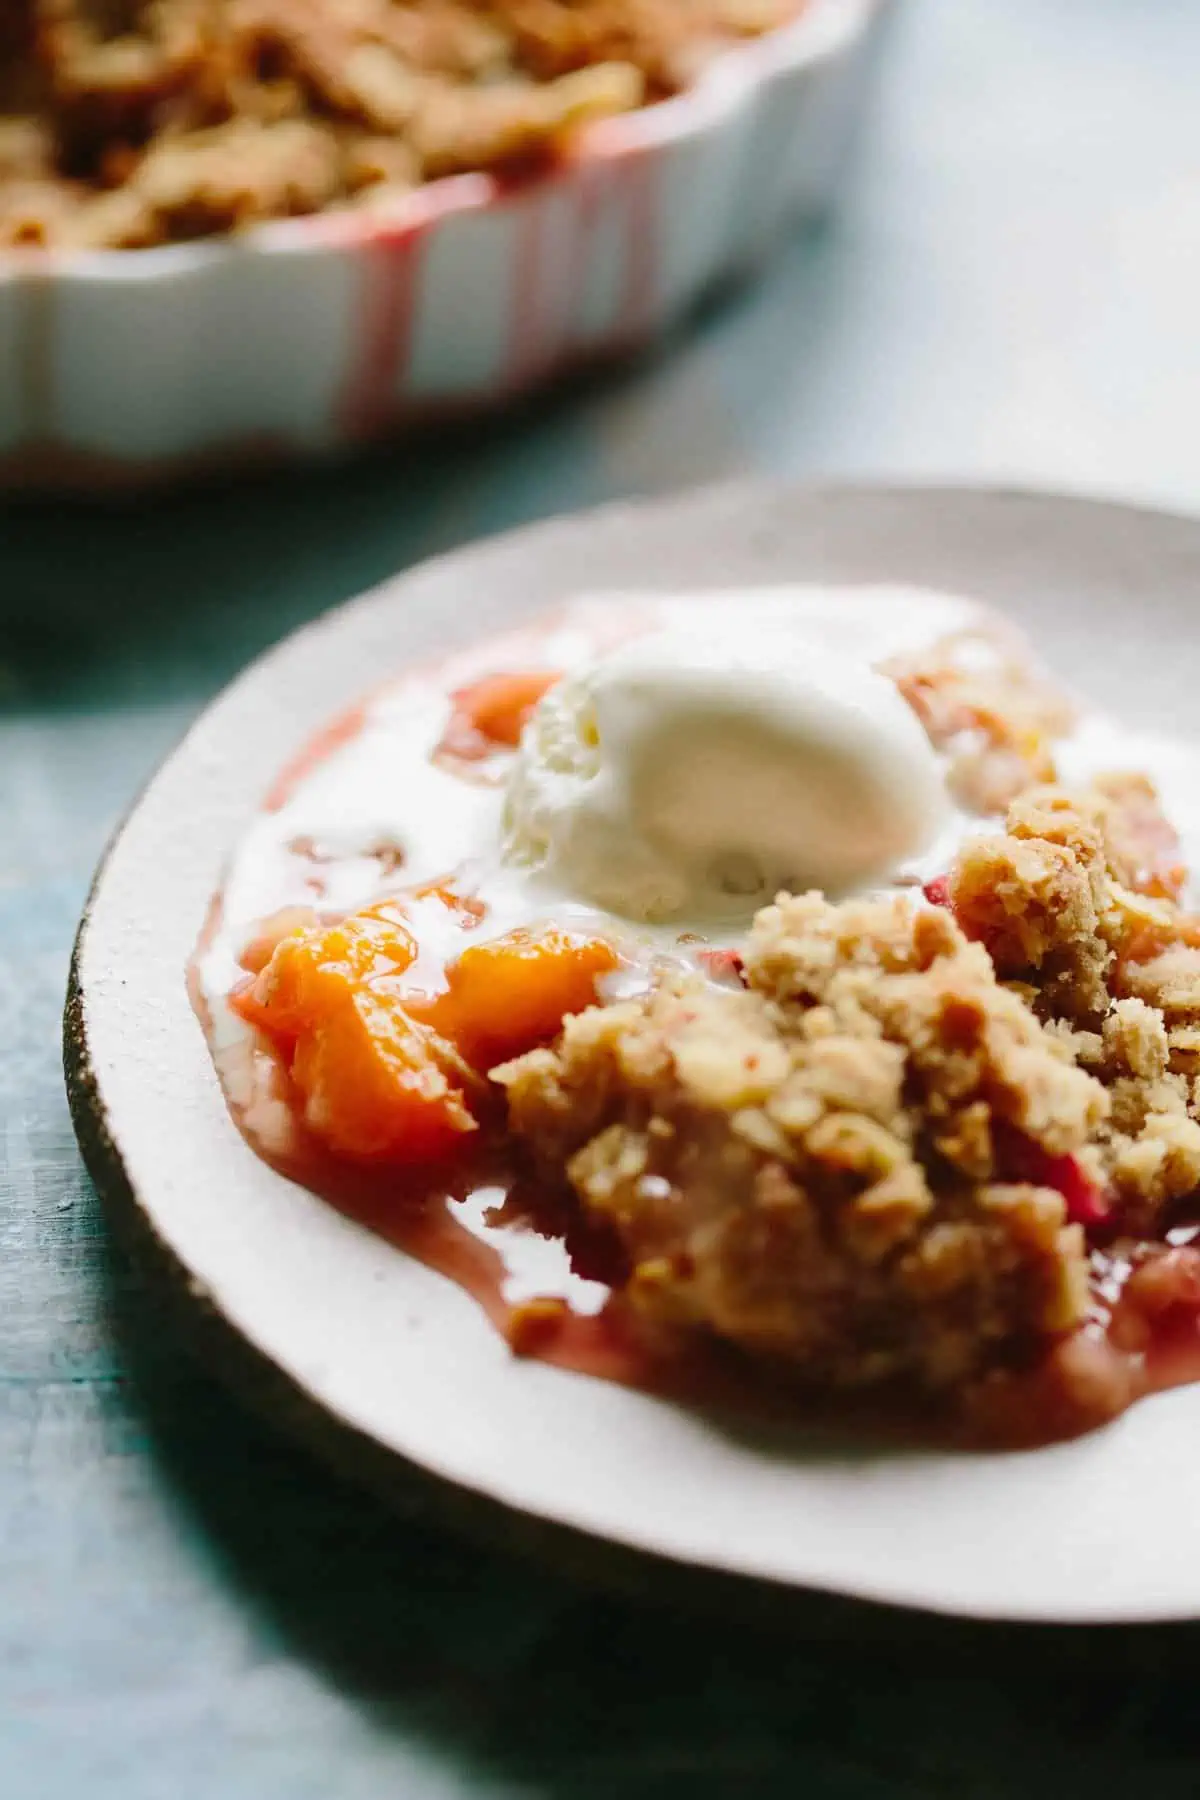 Close up shot of a dessert plate filled with warm apricot strawberry rhubarb crisp and melting vanilla ice cream.